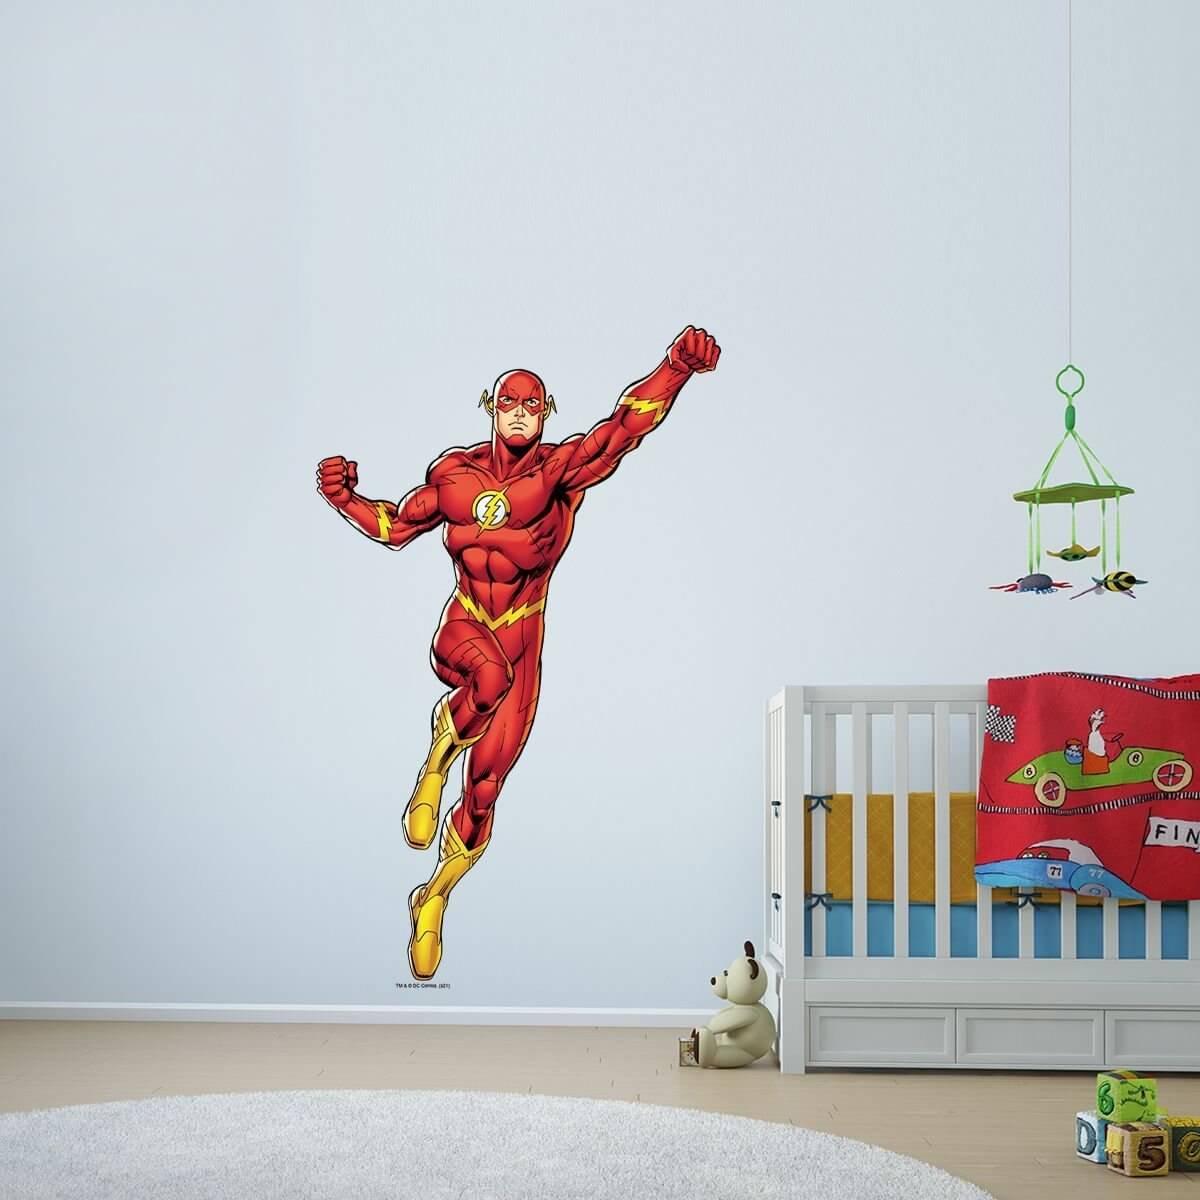 Kismet Decals Flash Ready for Combat Licensed Wall Sticker - Easy DIY Justice League Home & Room Decor Wall Art - Kismet Decals